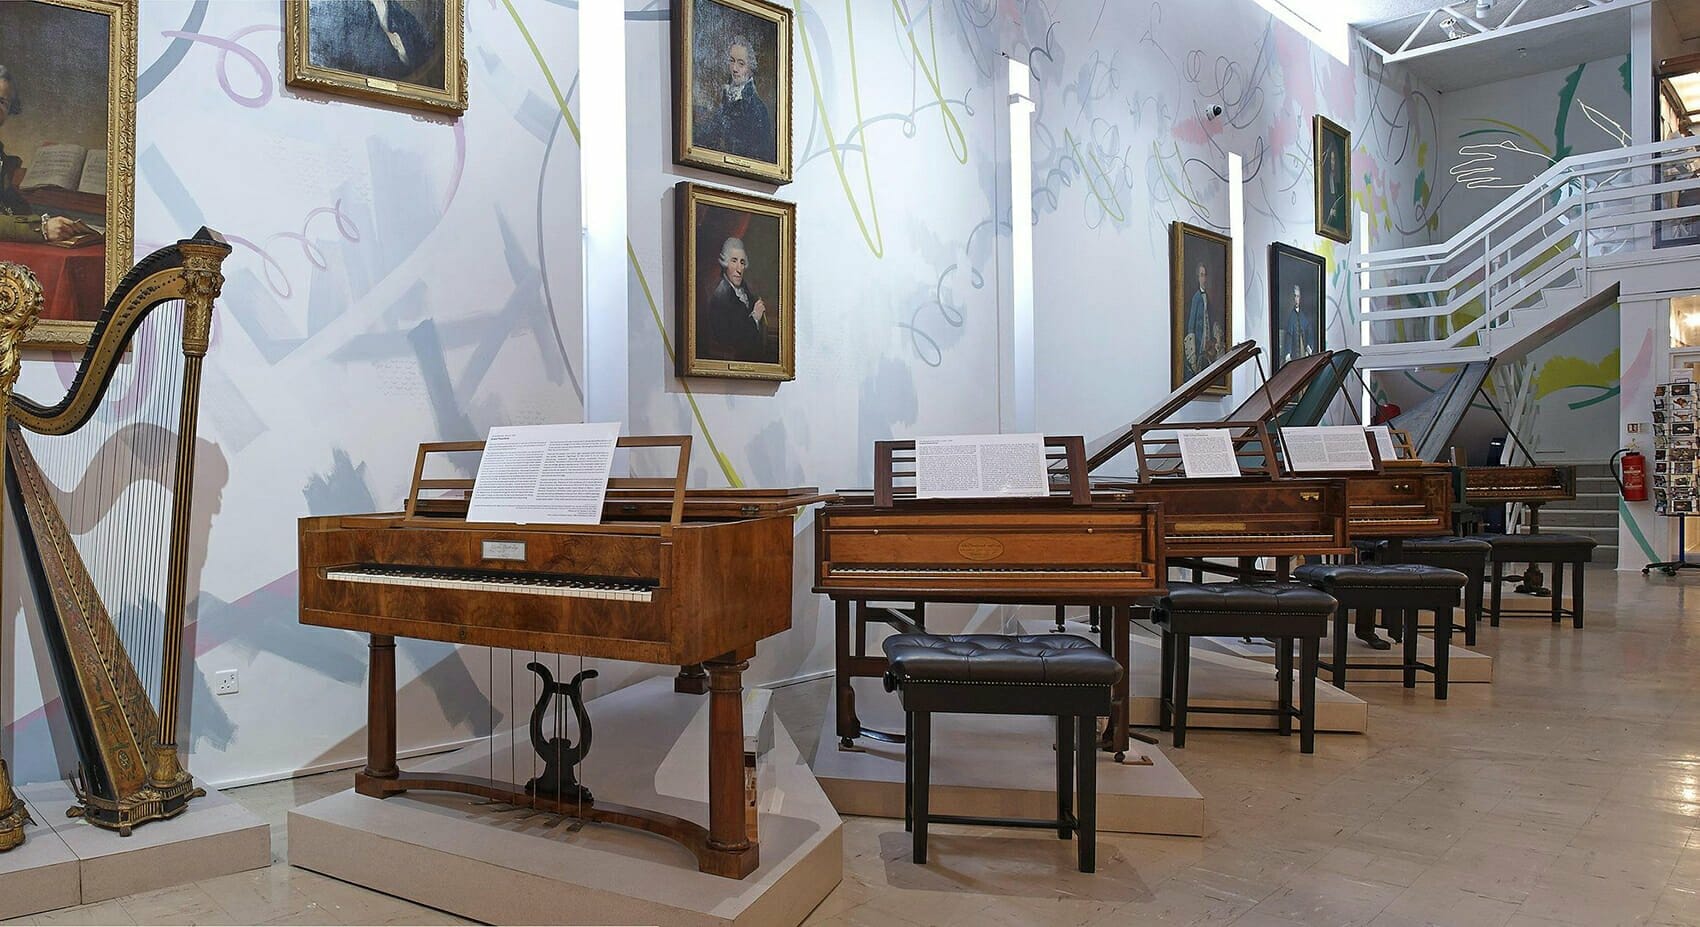 Royal College of Music Museum